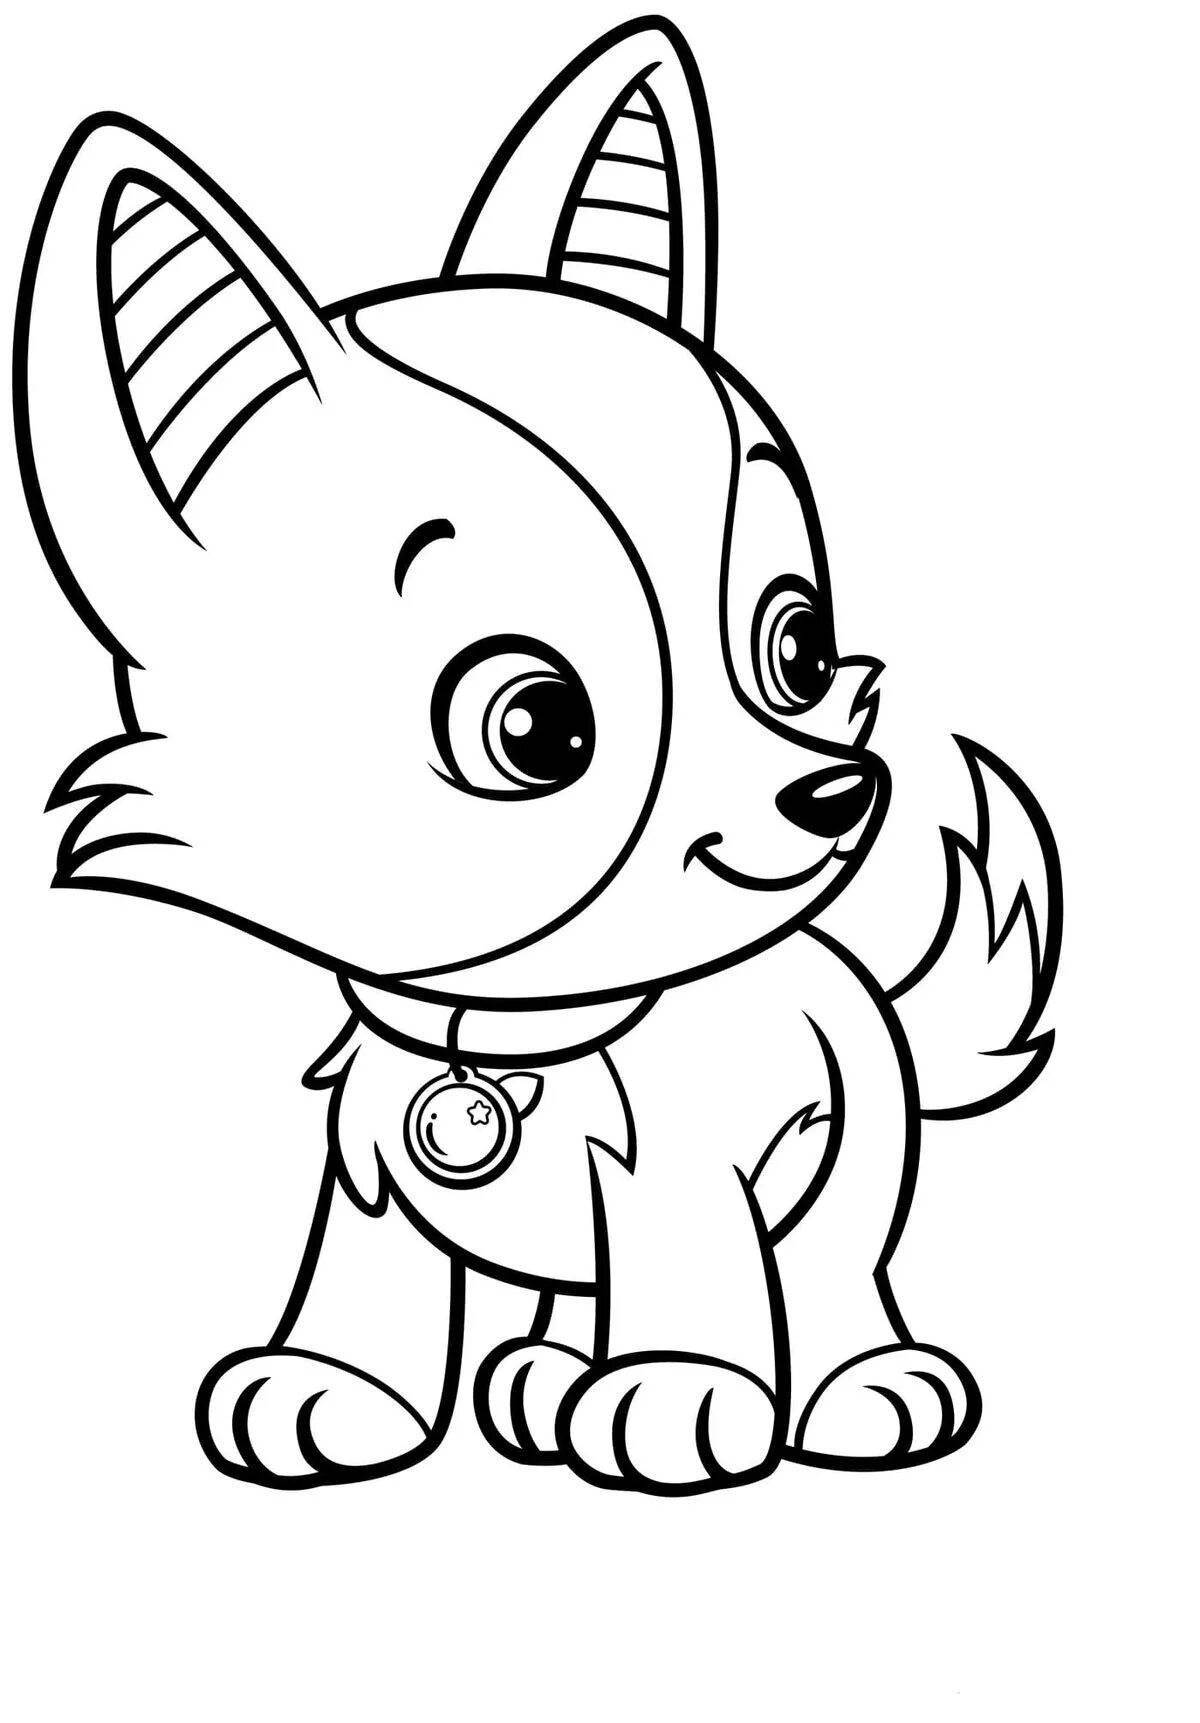 Courageous cats and dogs coloring page